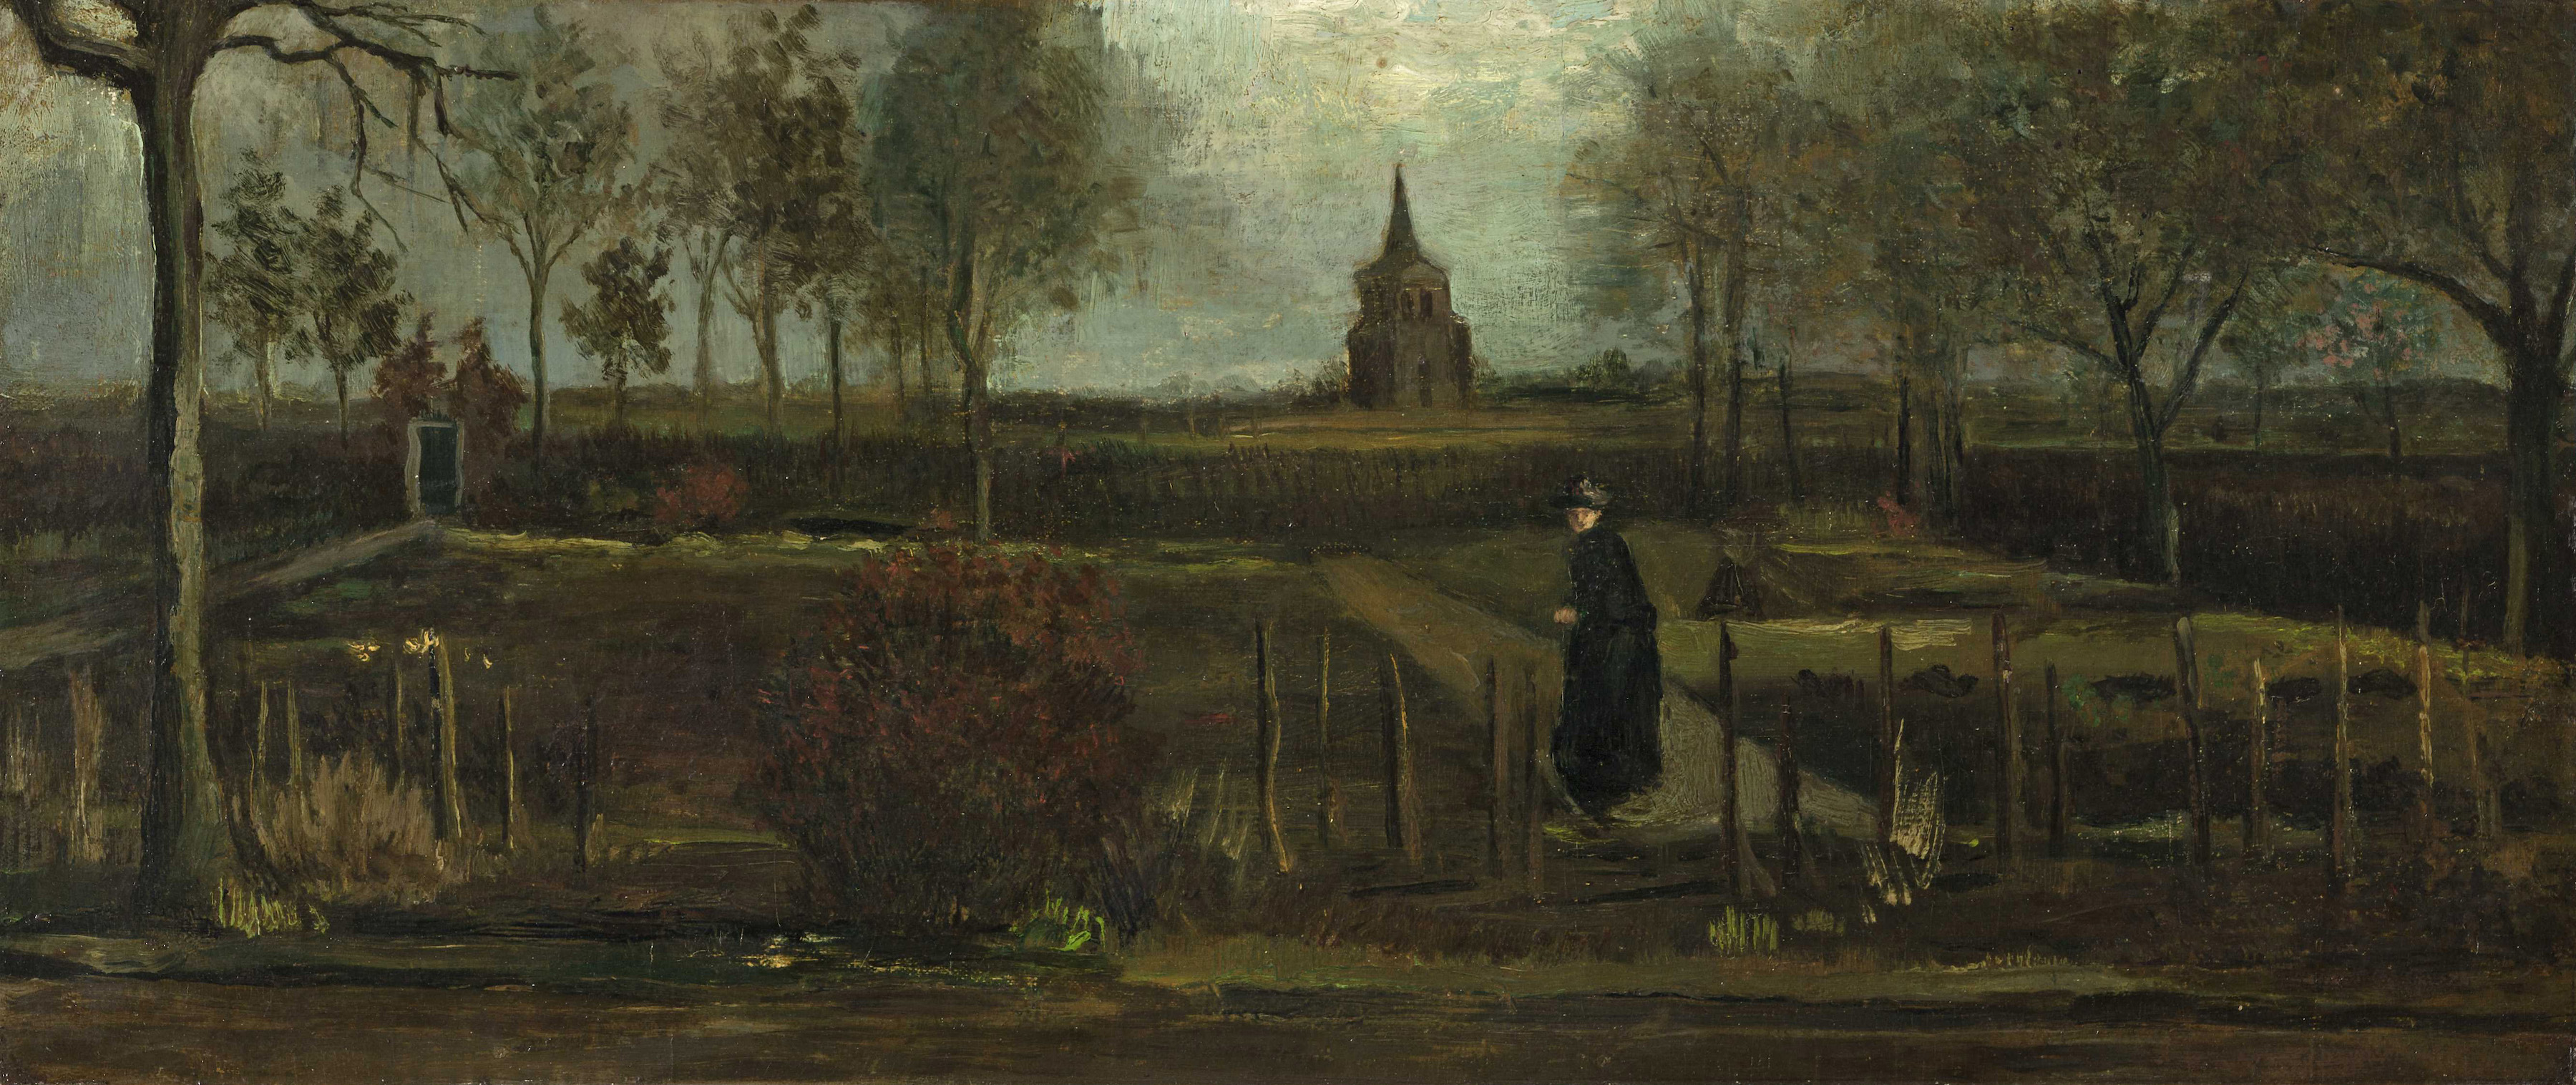 A handout file photo dated 17 October 2013 made available by the Groninger Museum shows the painting "Spring Garden", the rectory garden in Nuenen in the spring by the painter Vincent van Gogh in Groningen, Netherlands. Van Gogh's work was stolen from the Singer Laren museum on 30 March 2020. The painting was on loan from the Groninger Museum. Vincent van Gogh's work "Spring Garden" stolen from the Singer Laren museum, Groningen, Netherlands - 17 Oct 2013